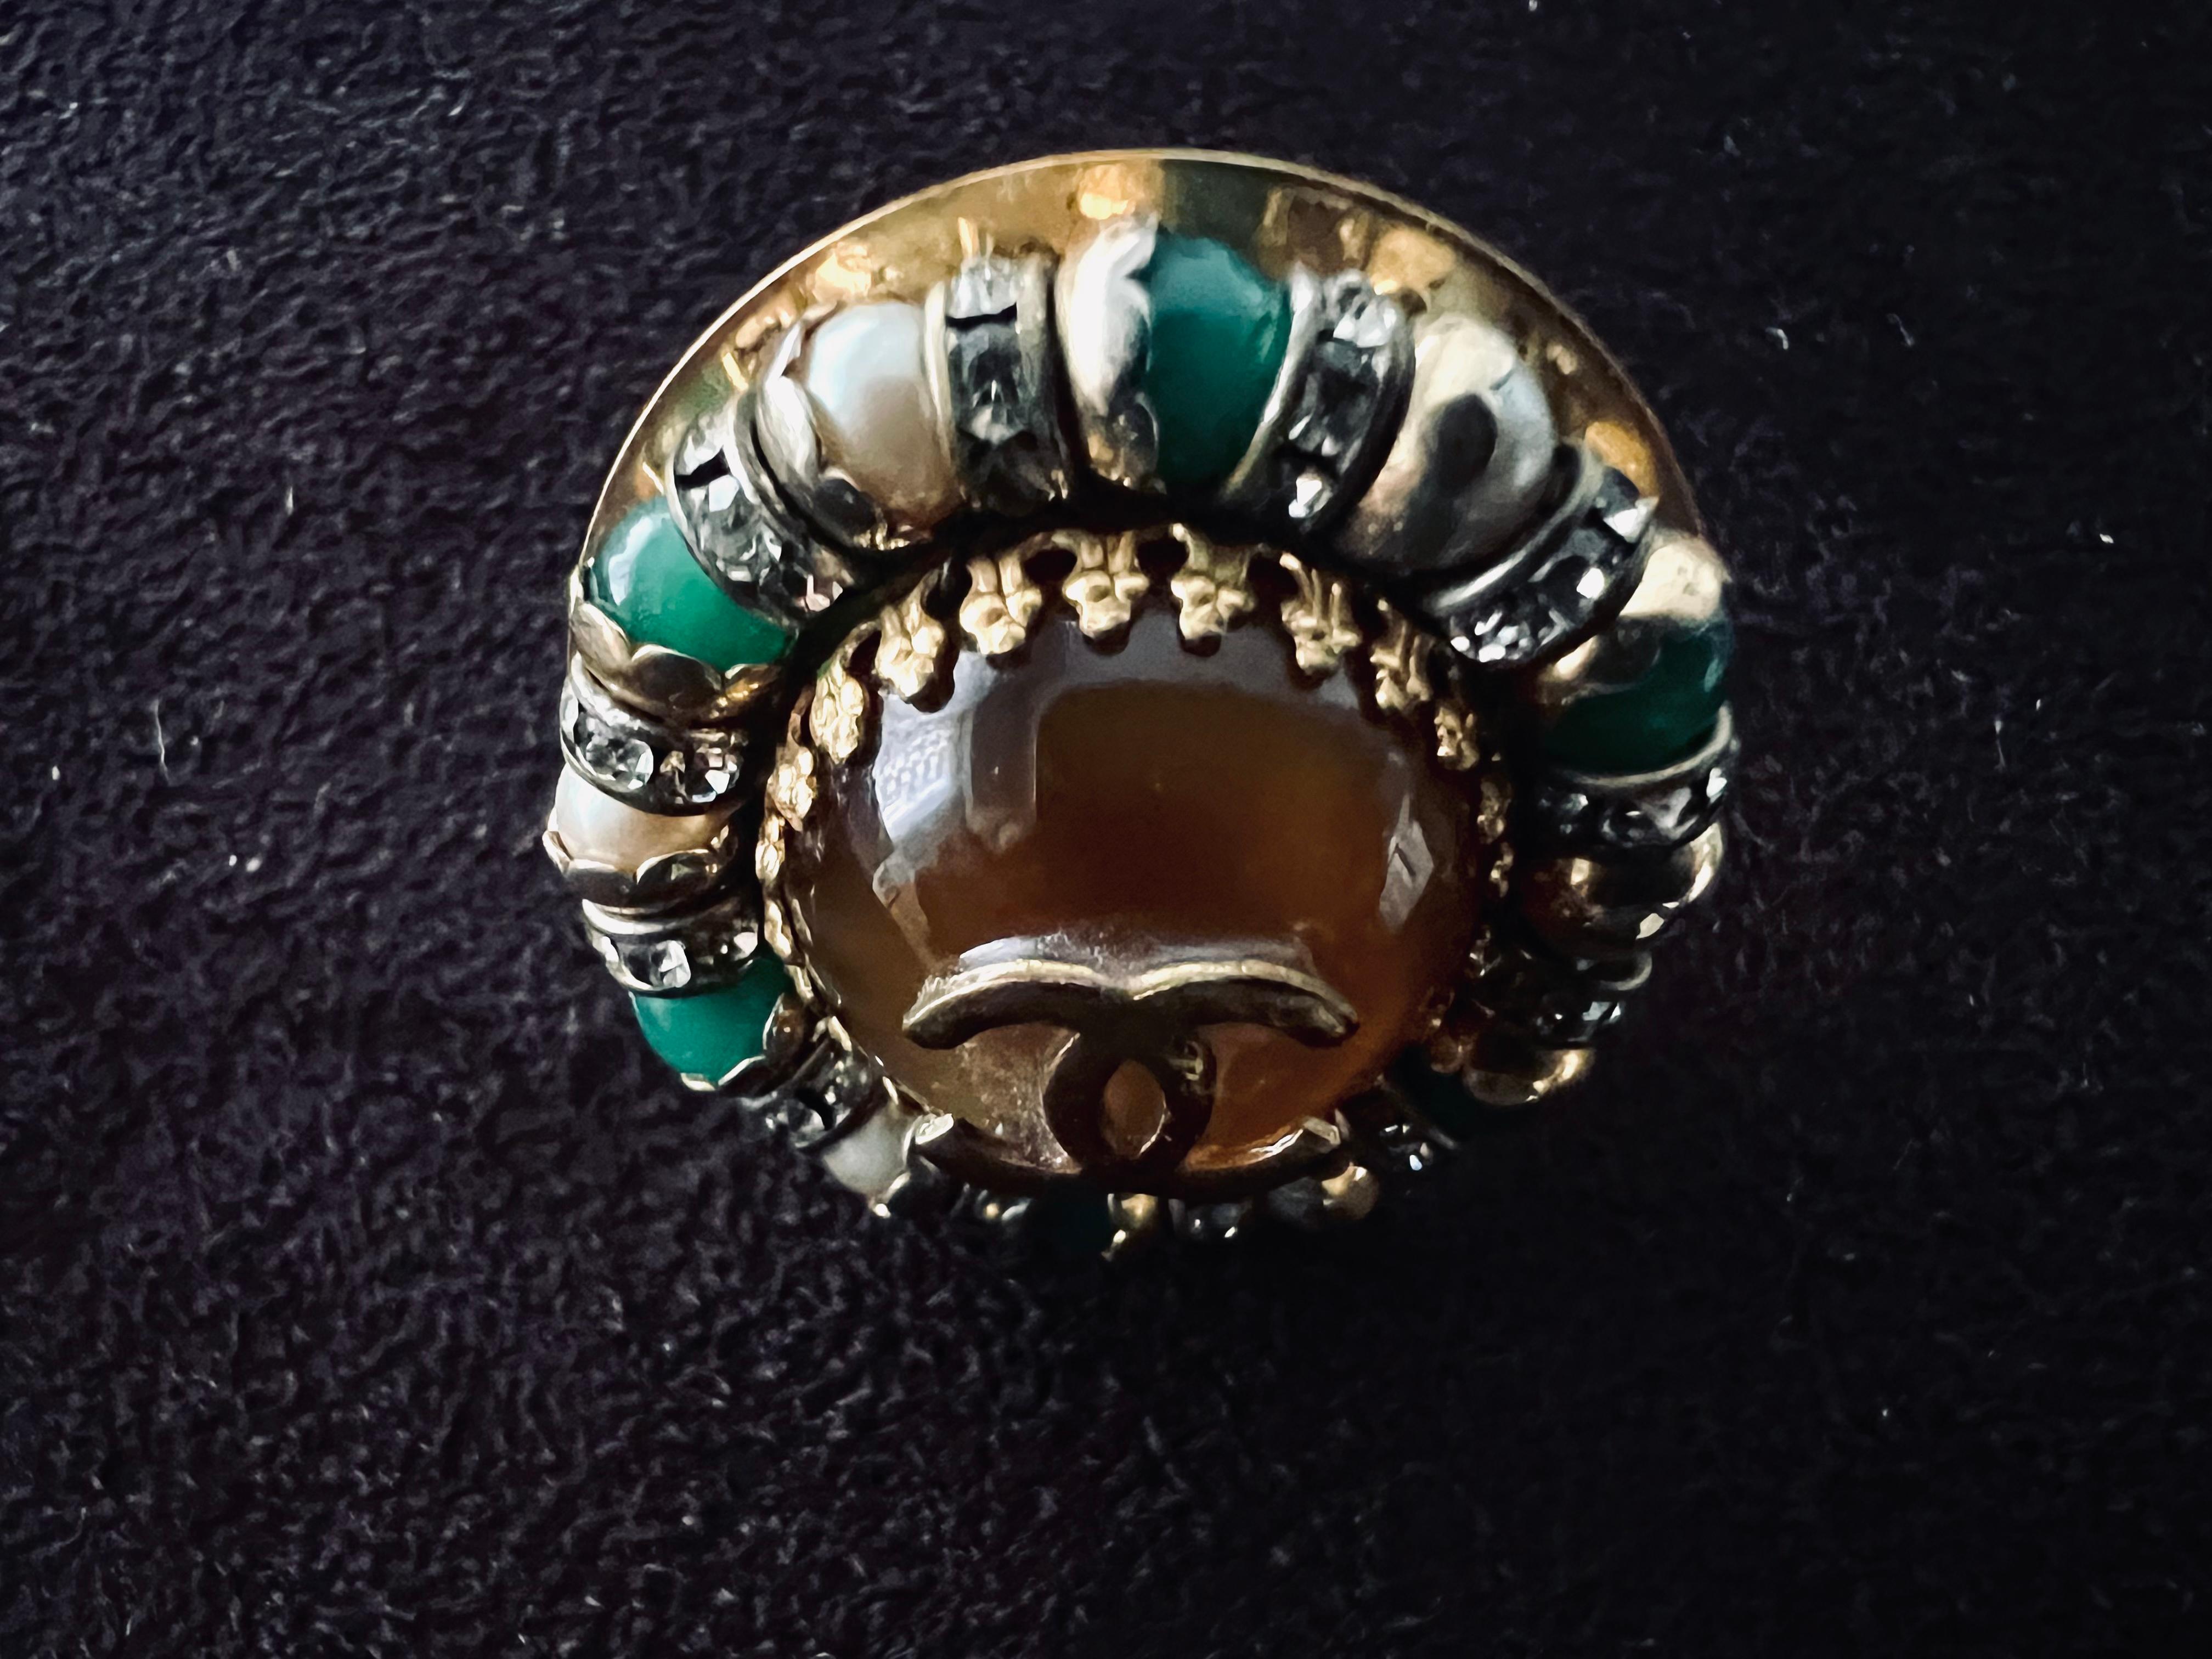 Old vintage chanel earring, circa 1970’s to 80’s. Dates unstated, “CHANEL” 
Gold Chanel logo on top of tiger eye like marbled color stone, surrounded rhinestones,green stone,pearls.